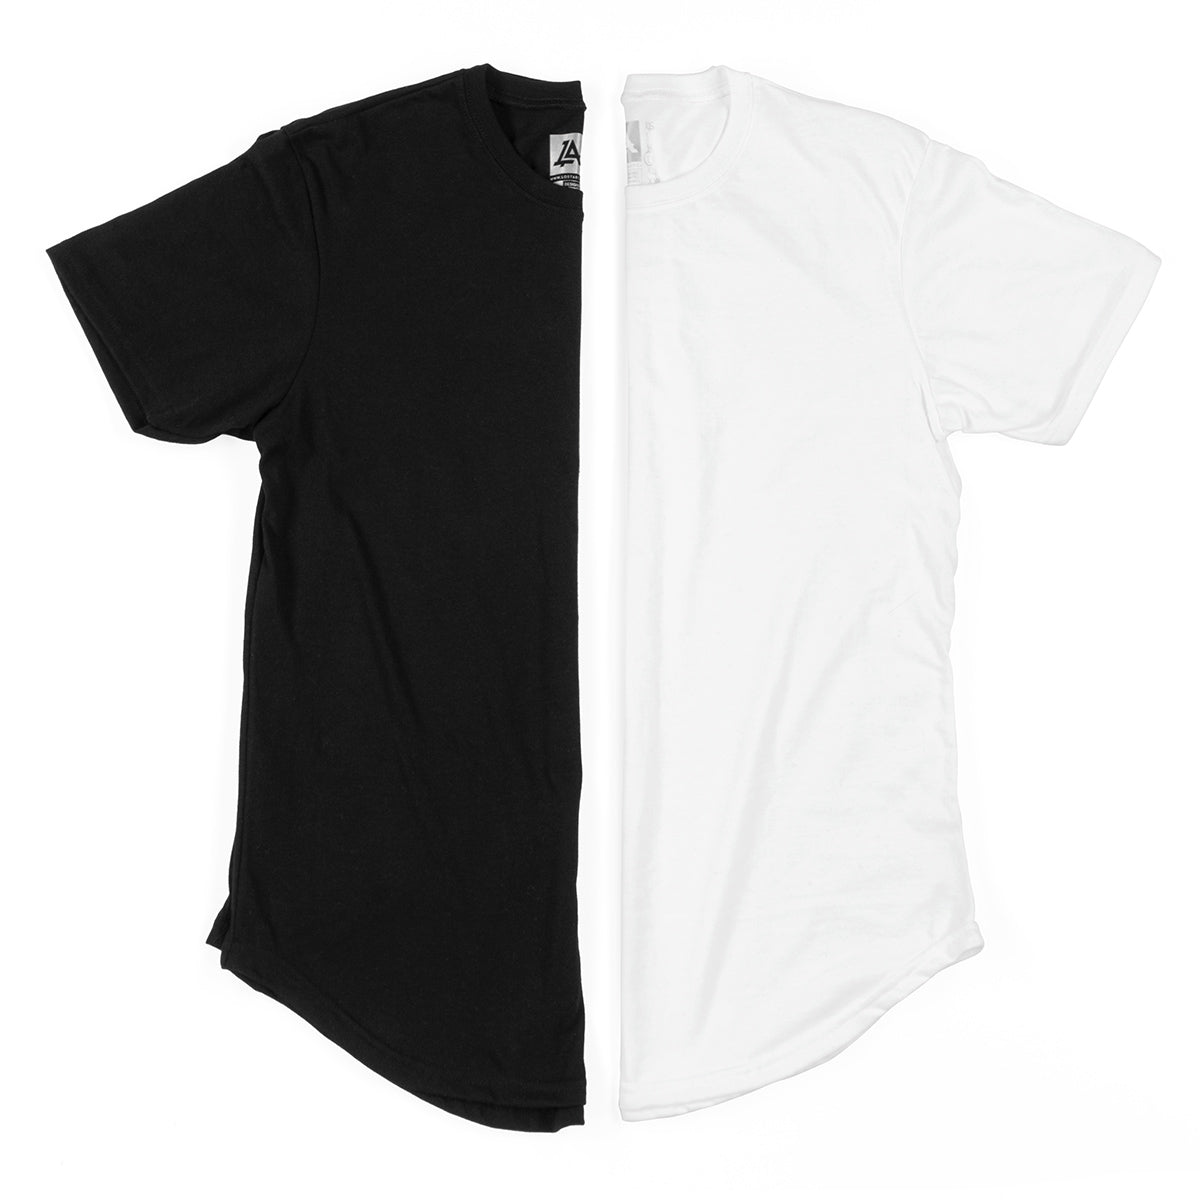 Lost Art Canada - black and white tagless basic tees half fold view